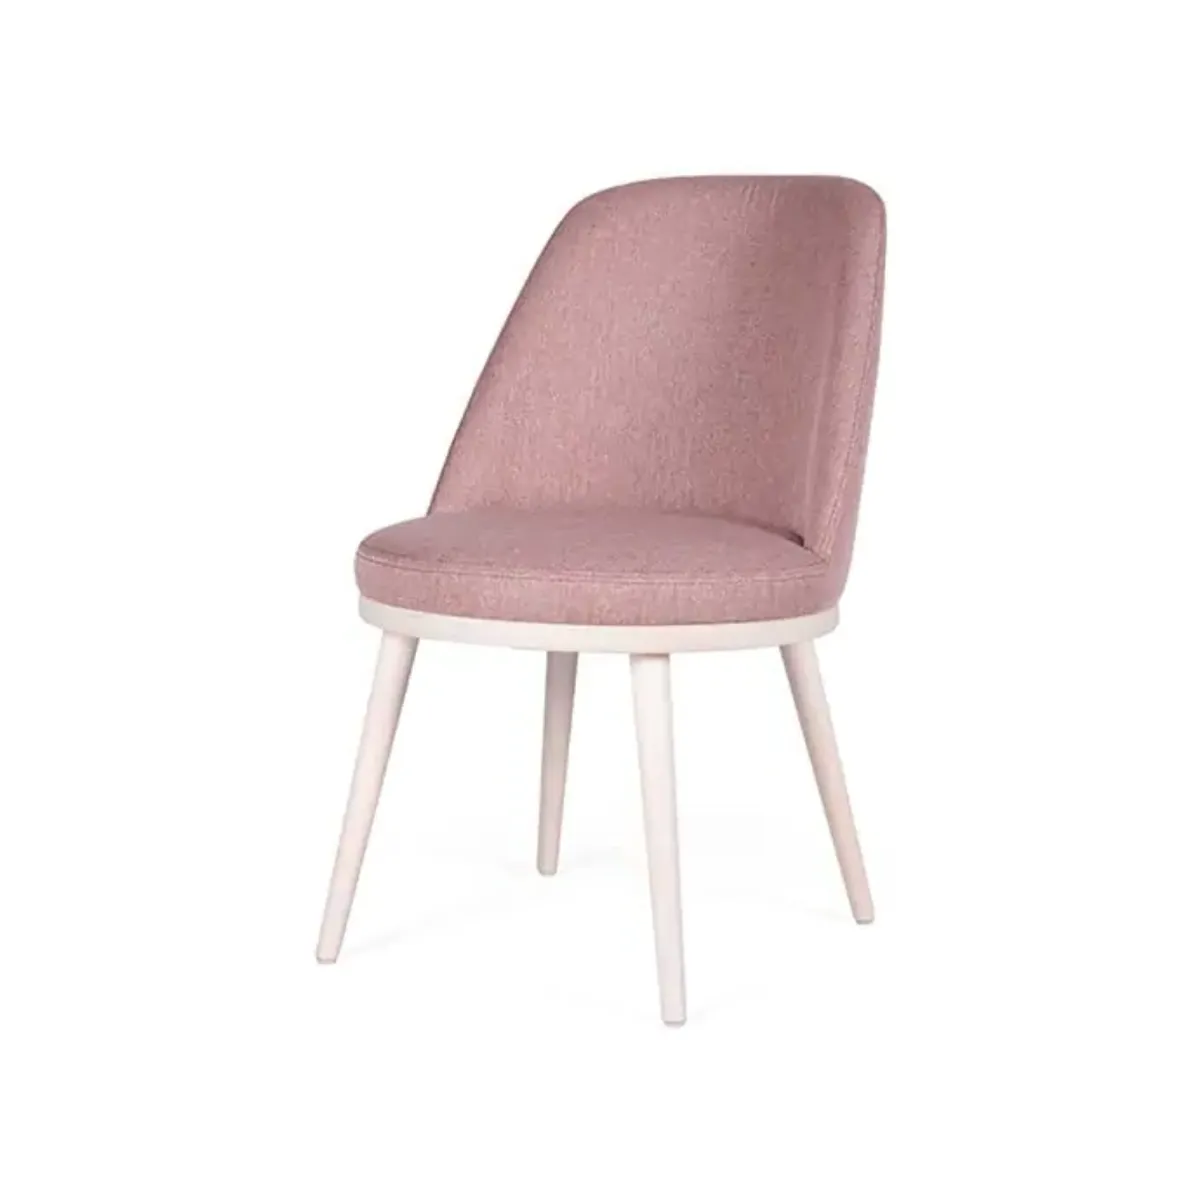 Audrey soft side chair